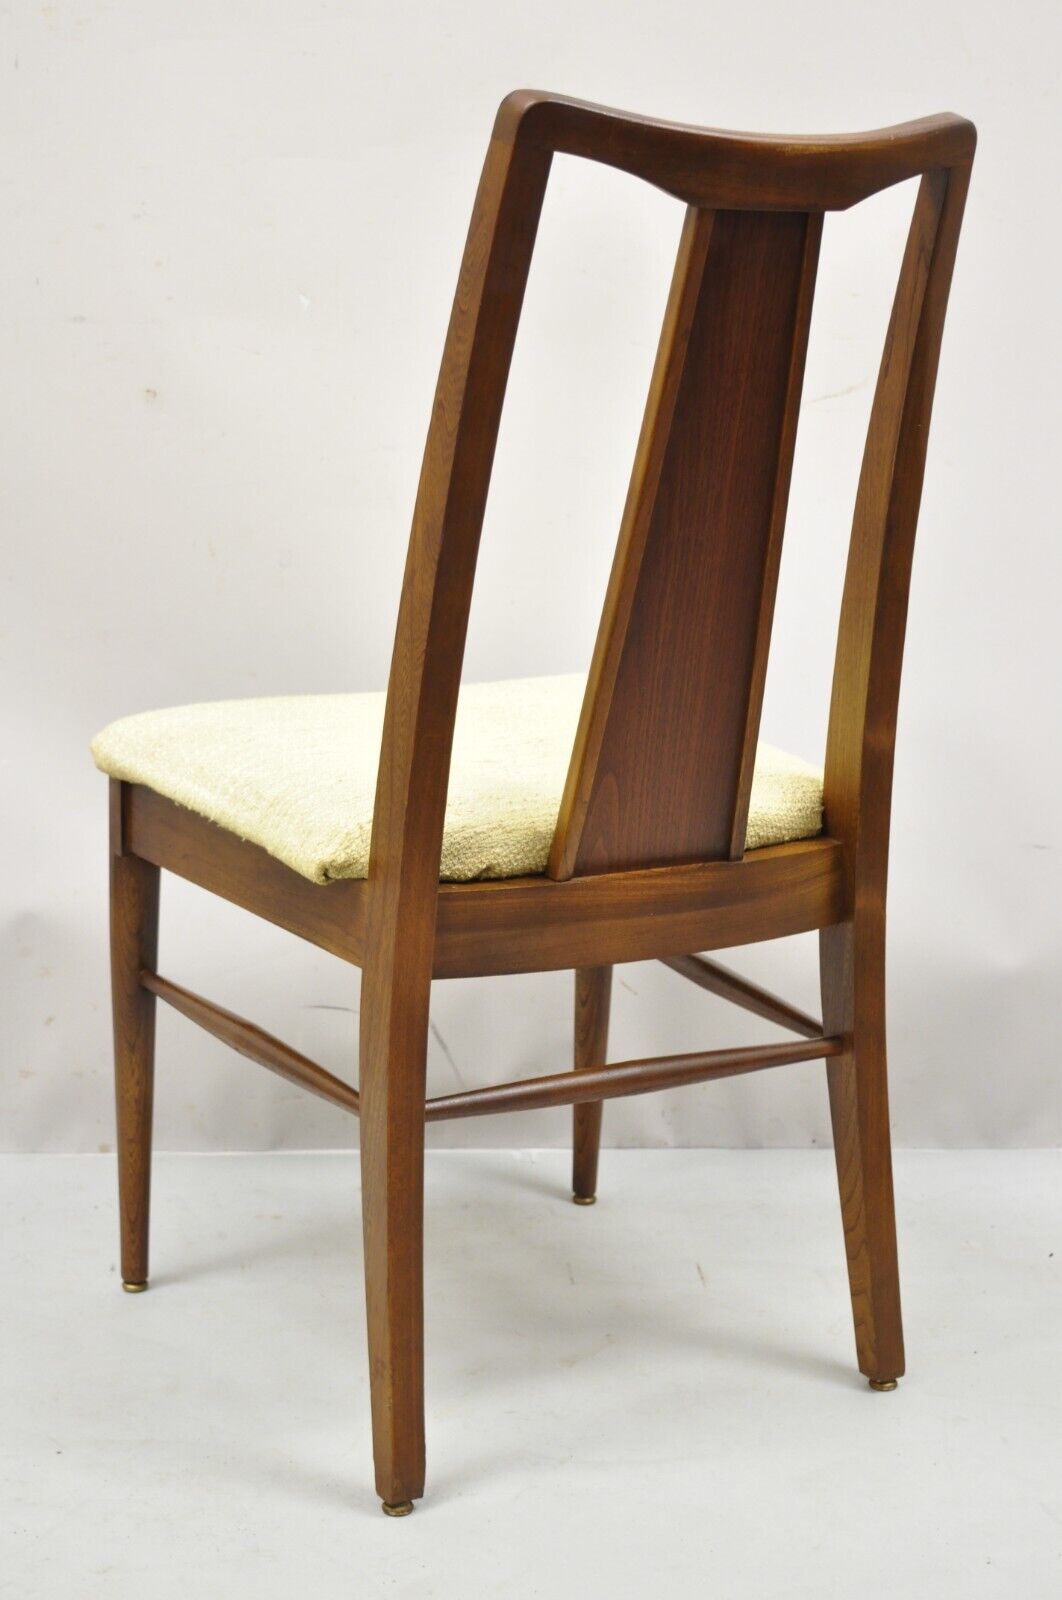 Vintage Mid Century Modern Walnut Cane Back Dining Chairs - Set of 4